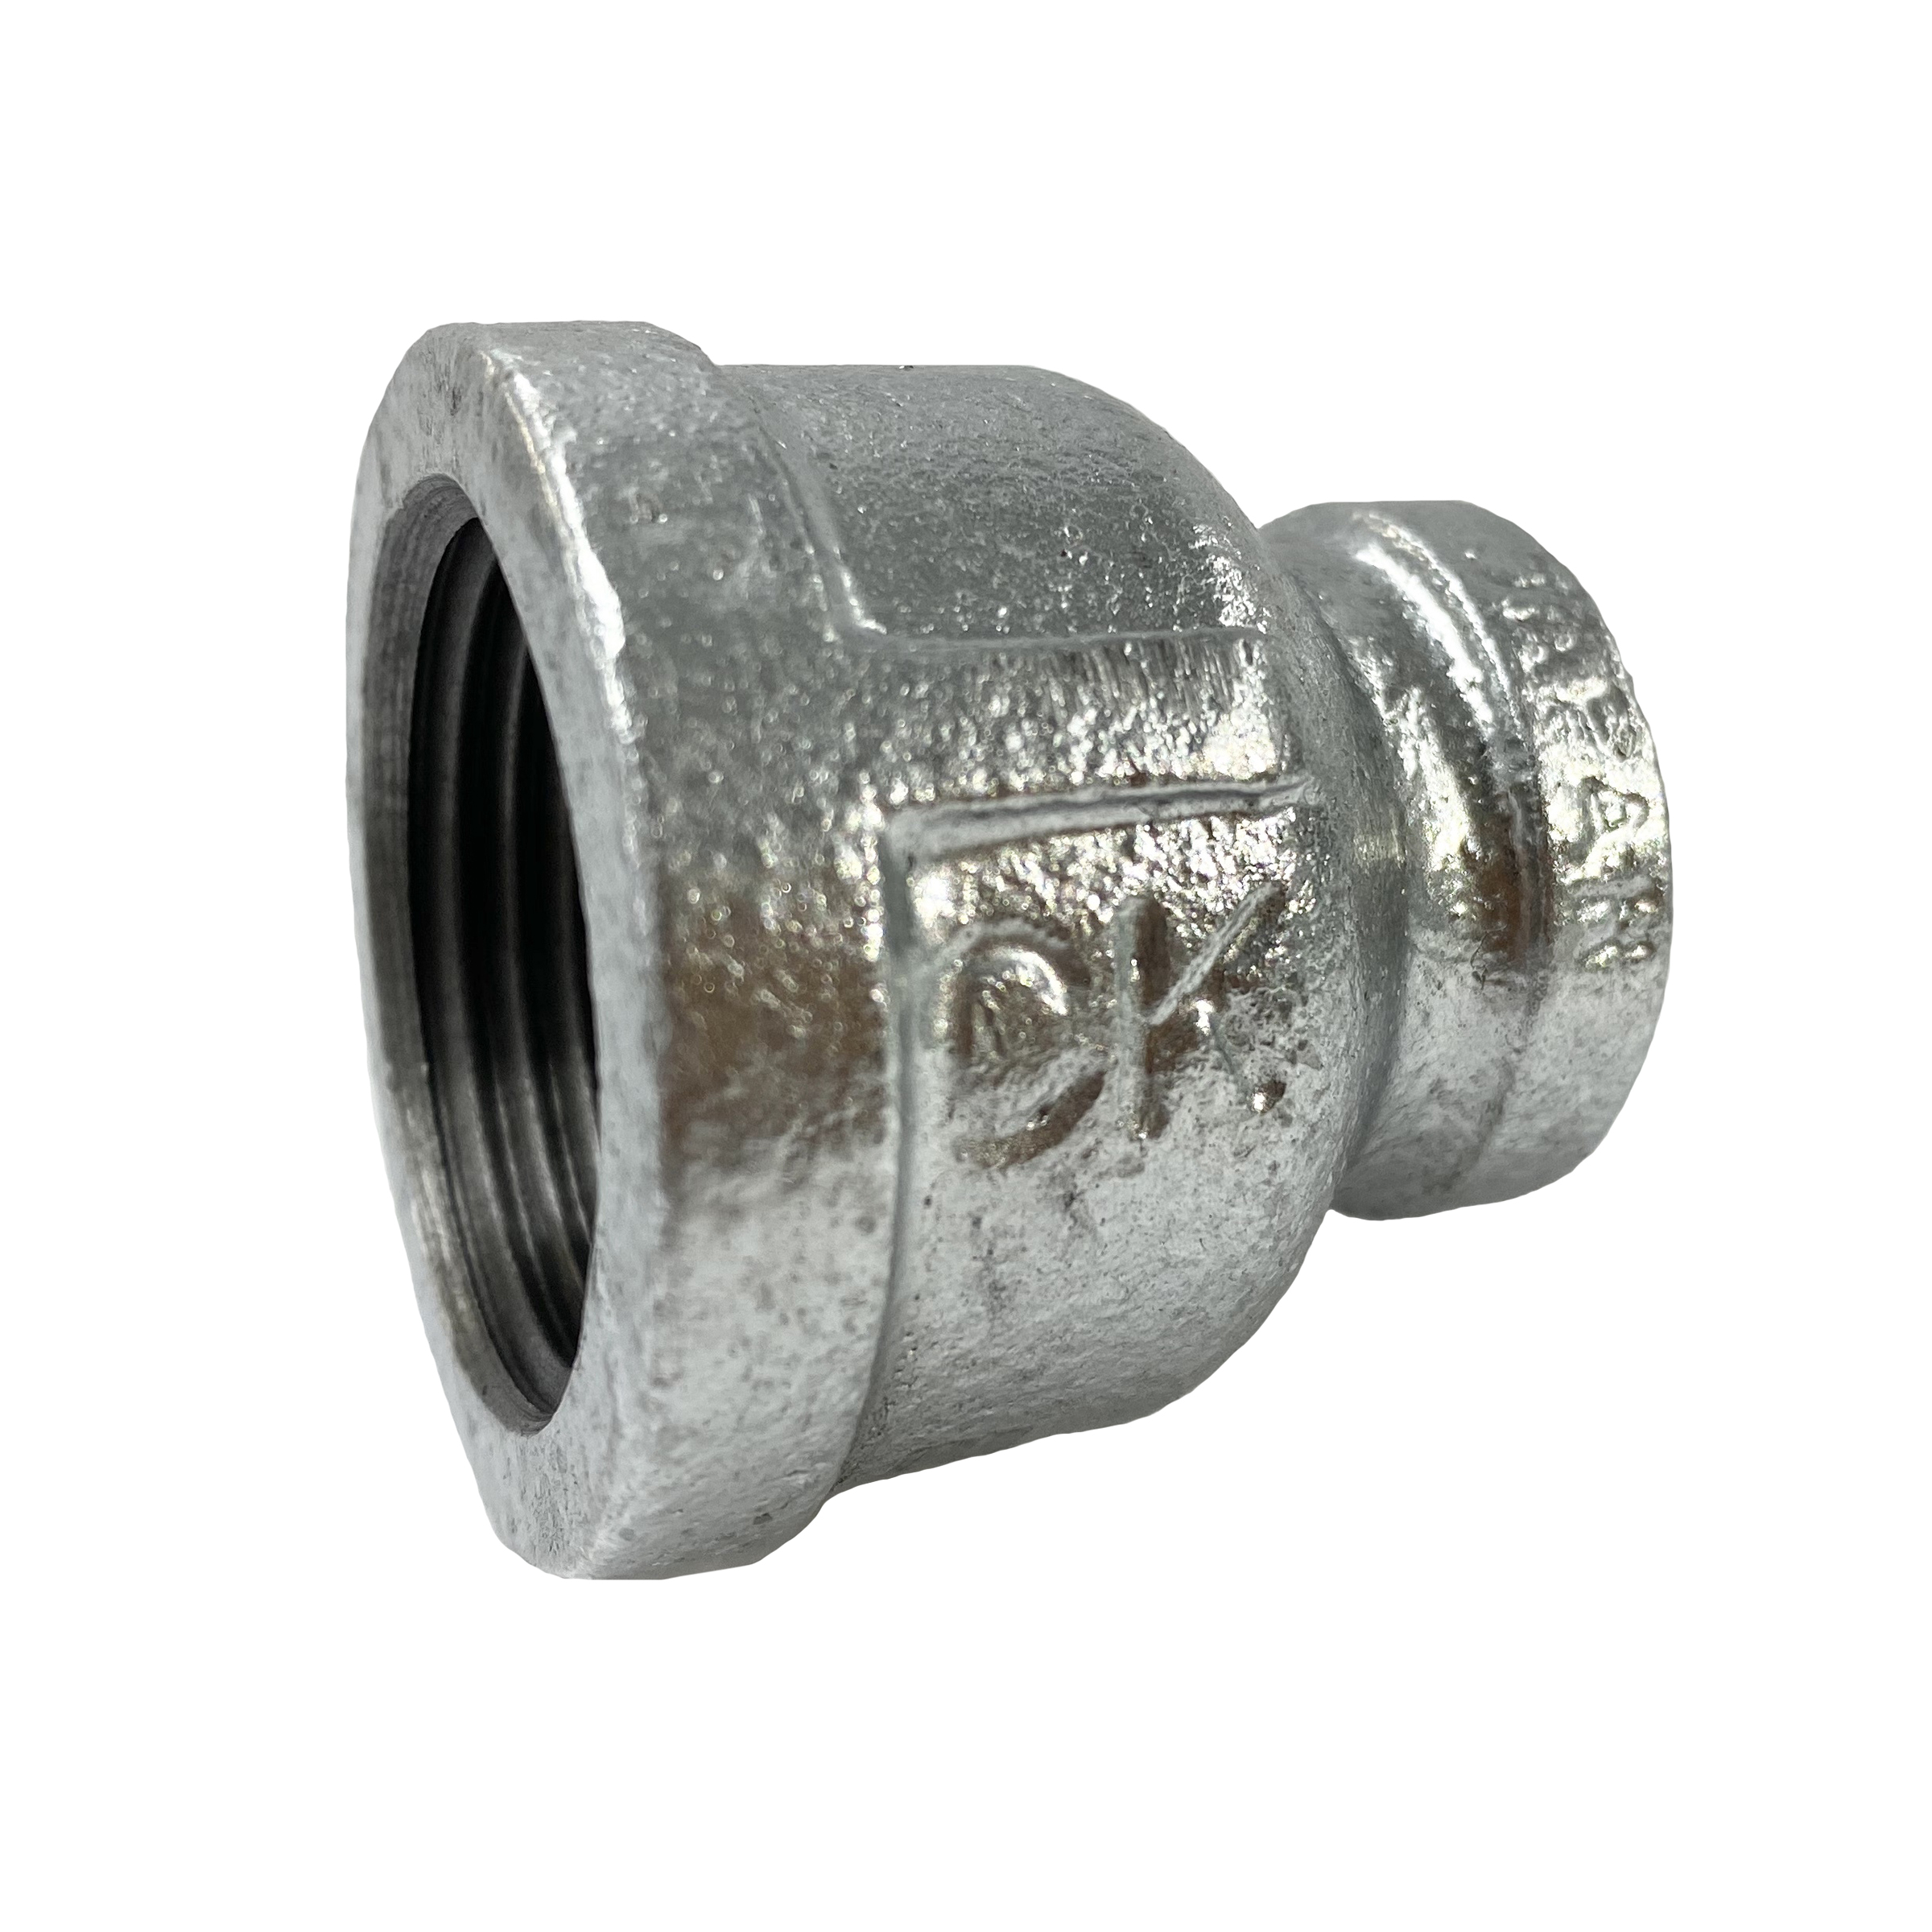 CK Fittings - Screw-in Type Malleable Cast Iron Pipe Fitting - Socket with Different Diameters with Band BRS-50X32-W